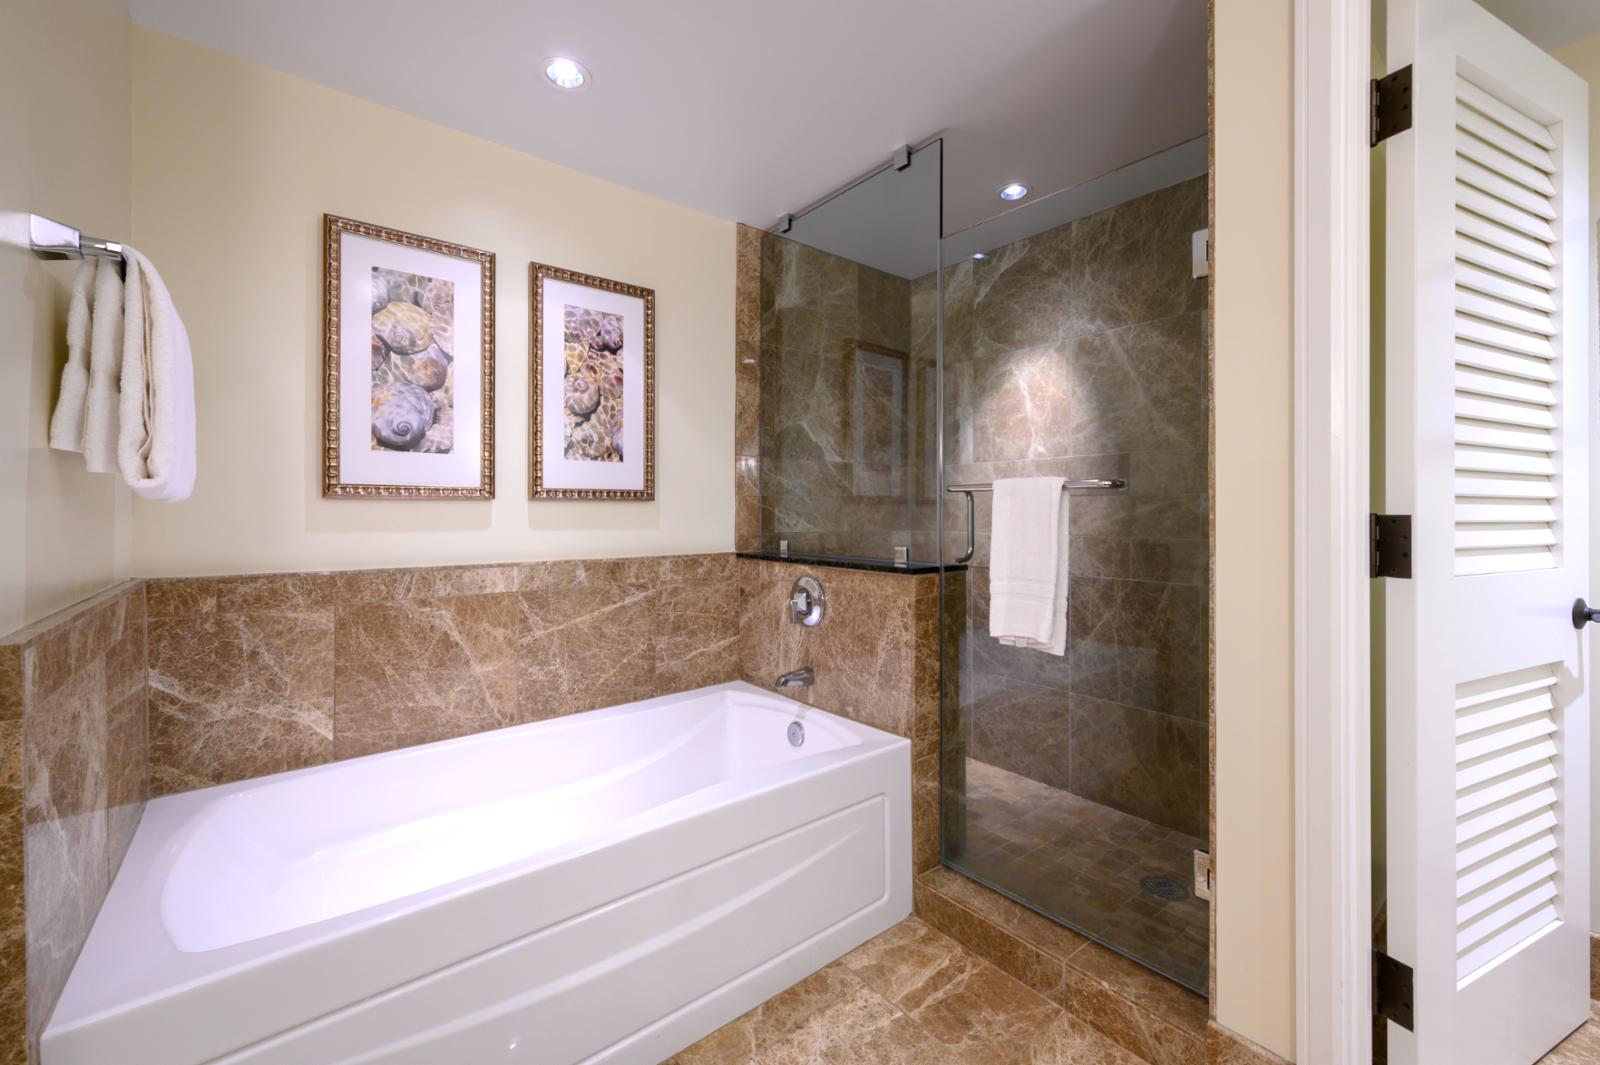 Large soaking tub for you to relax and enjoy this luxury vacation!